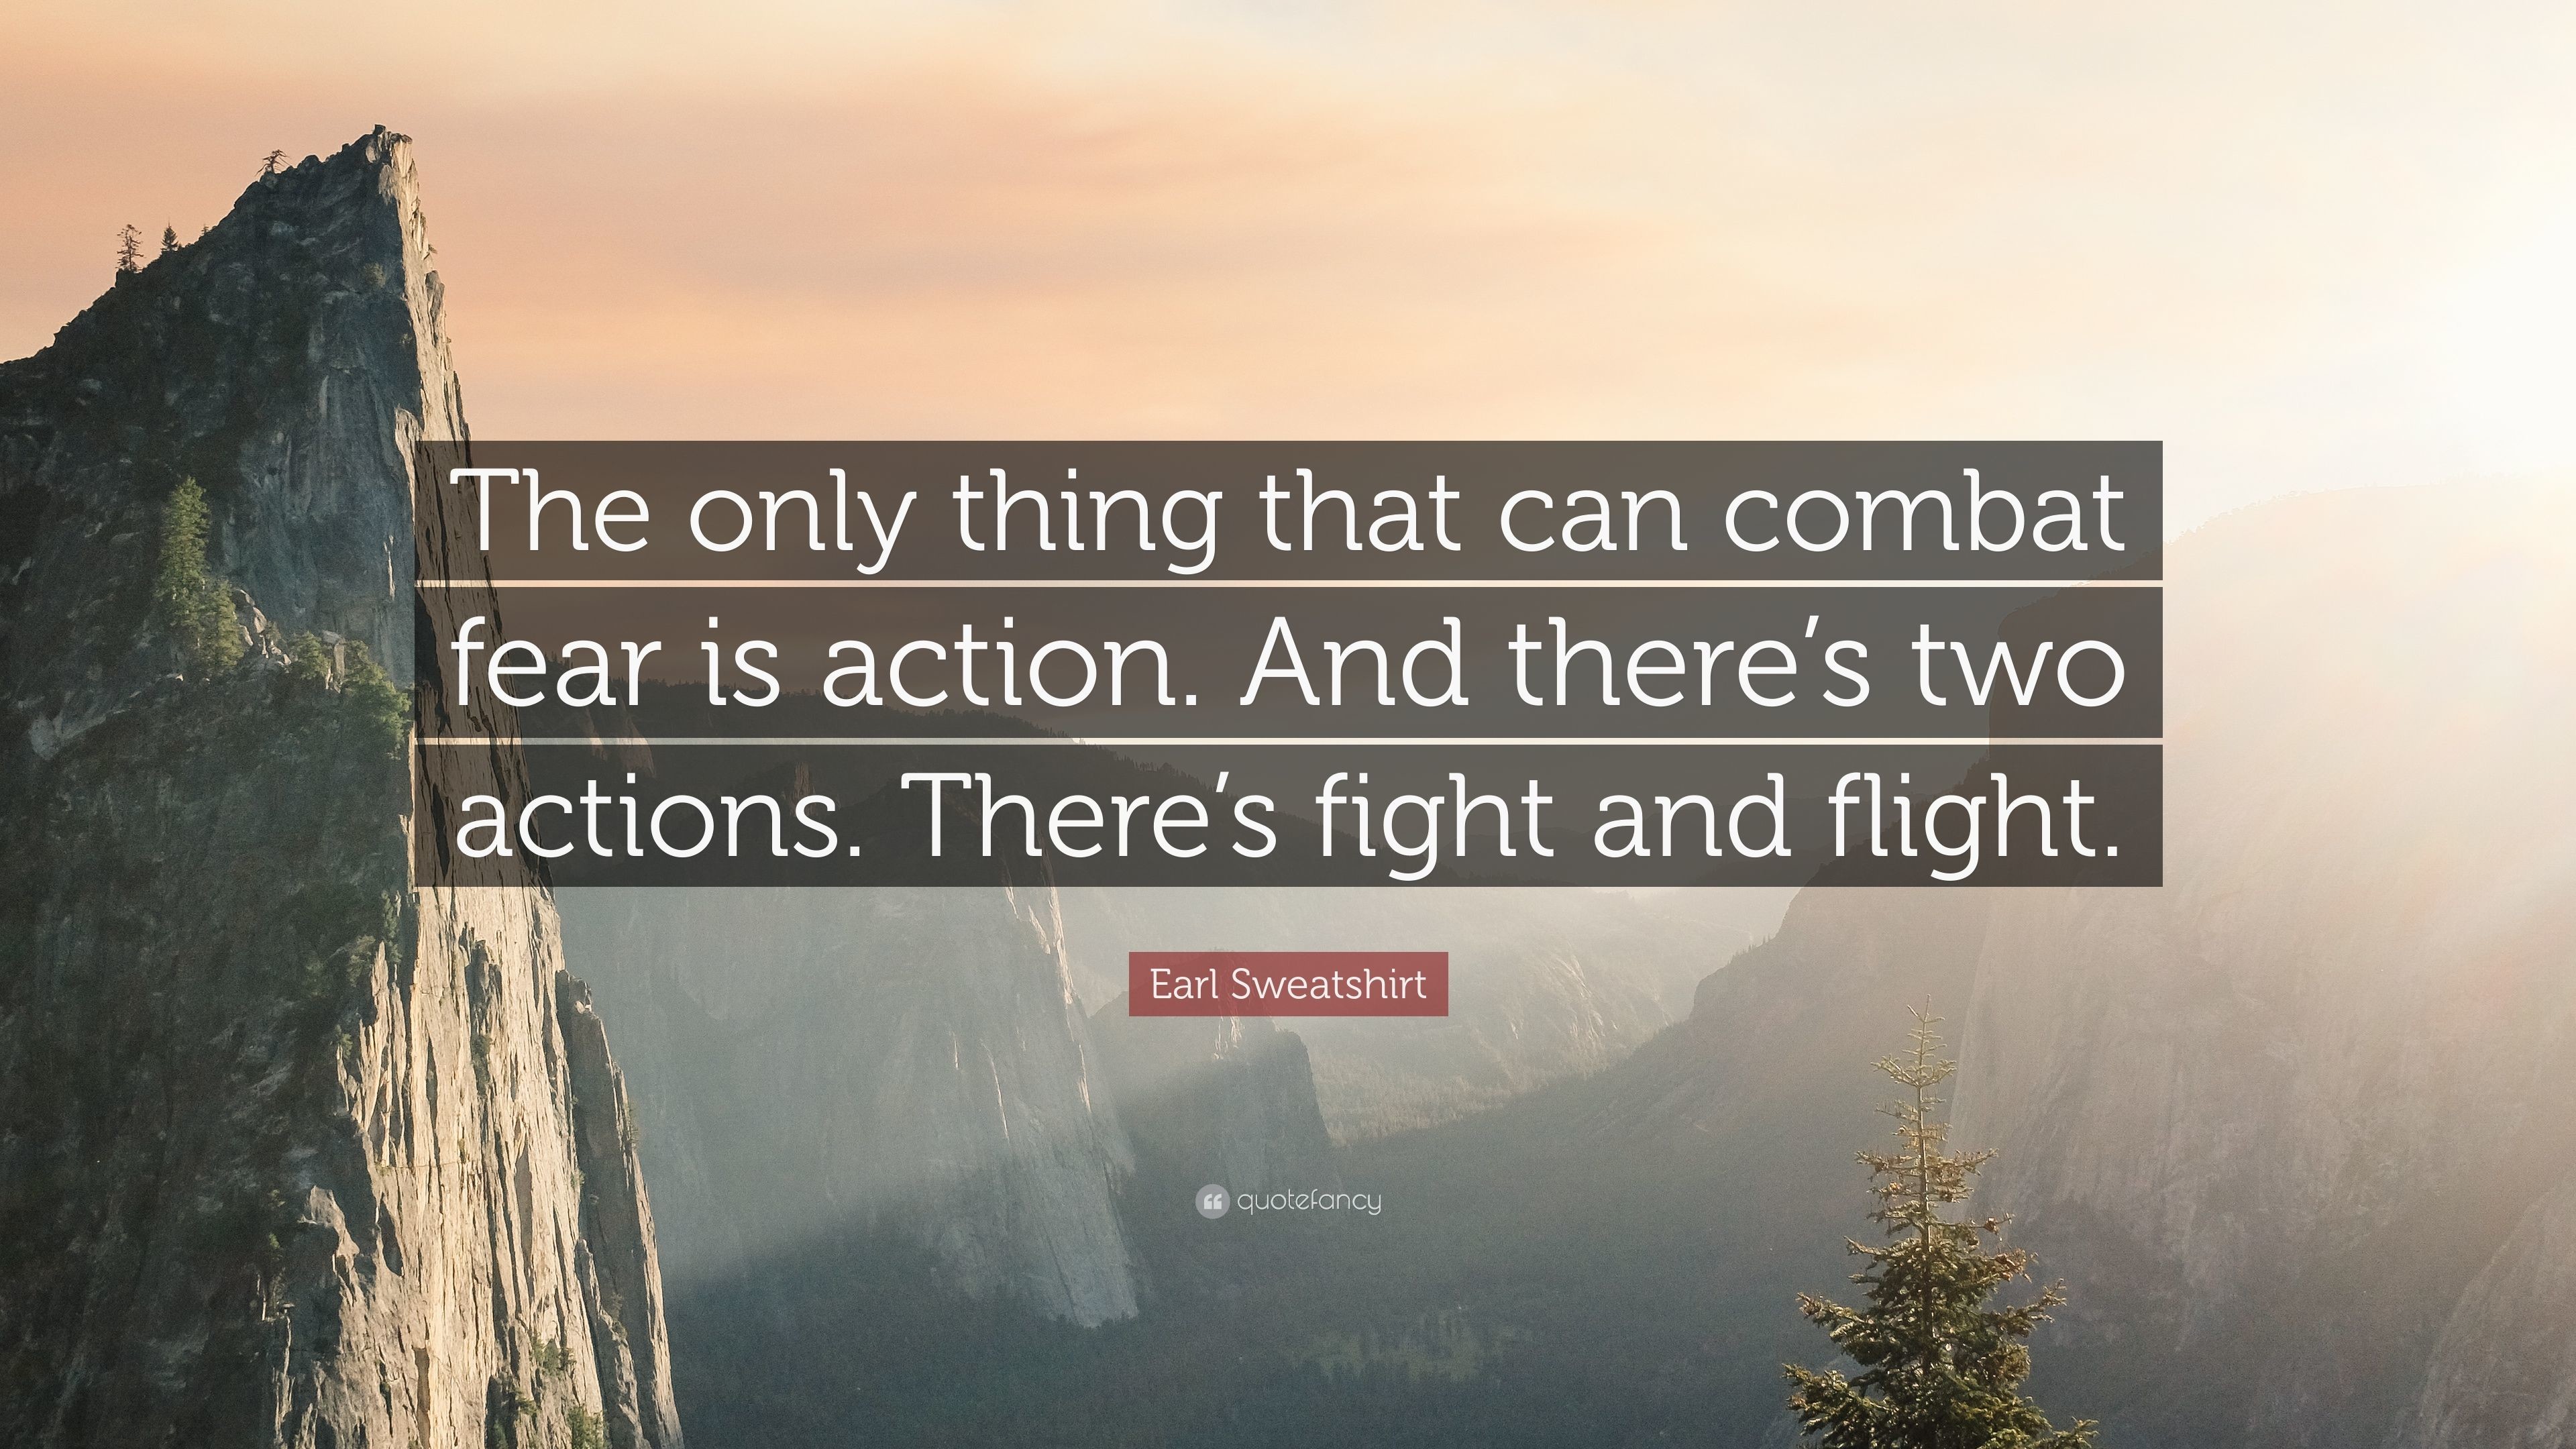 Earl Sweatshirt Quote: “The only thing that can combat fear is action. And